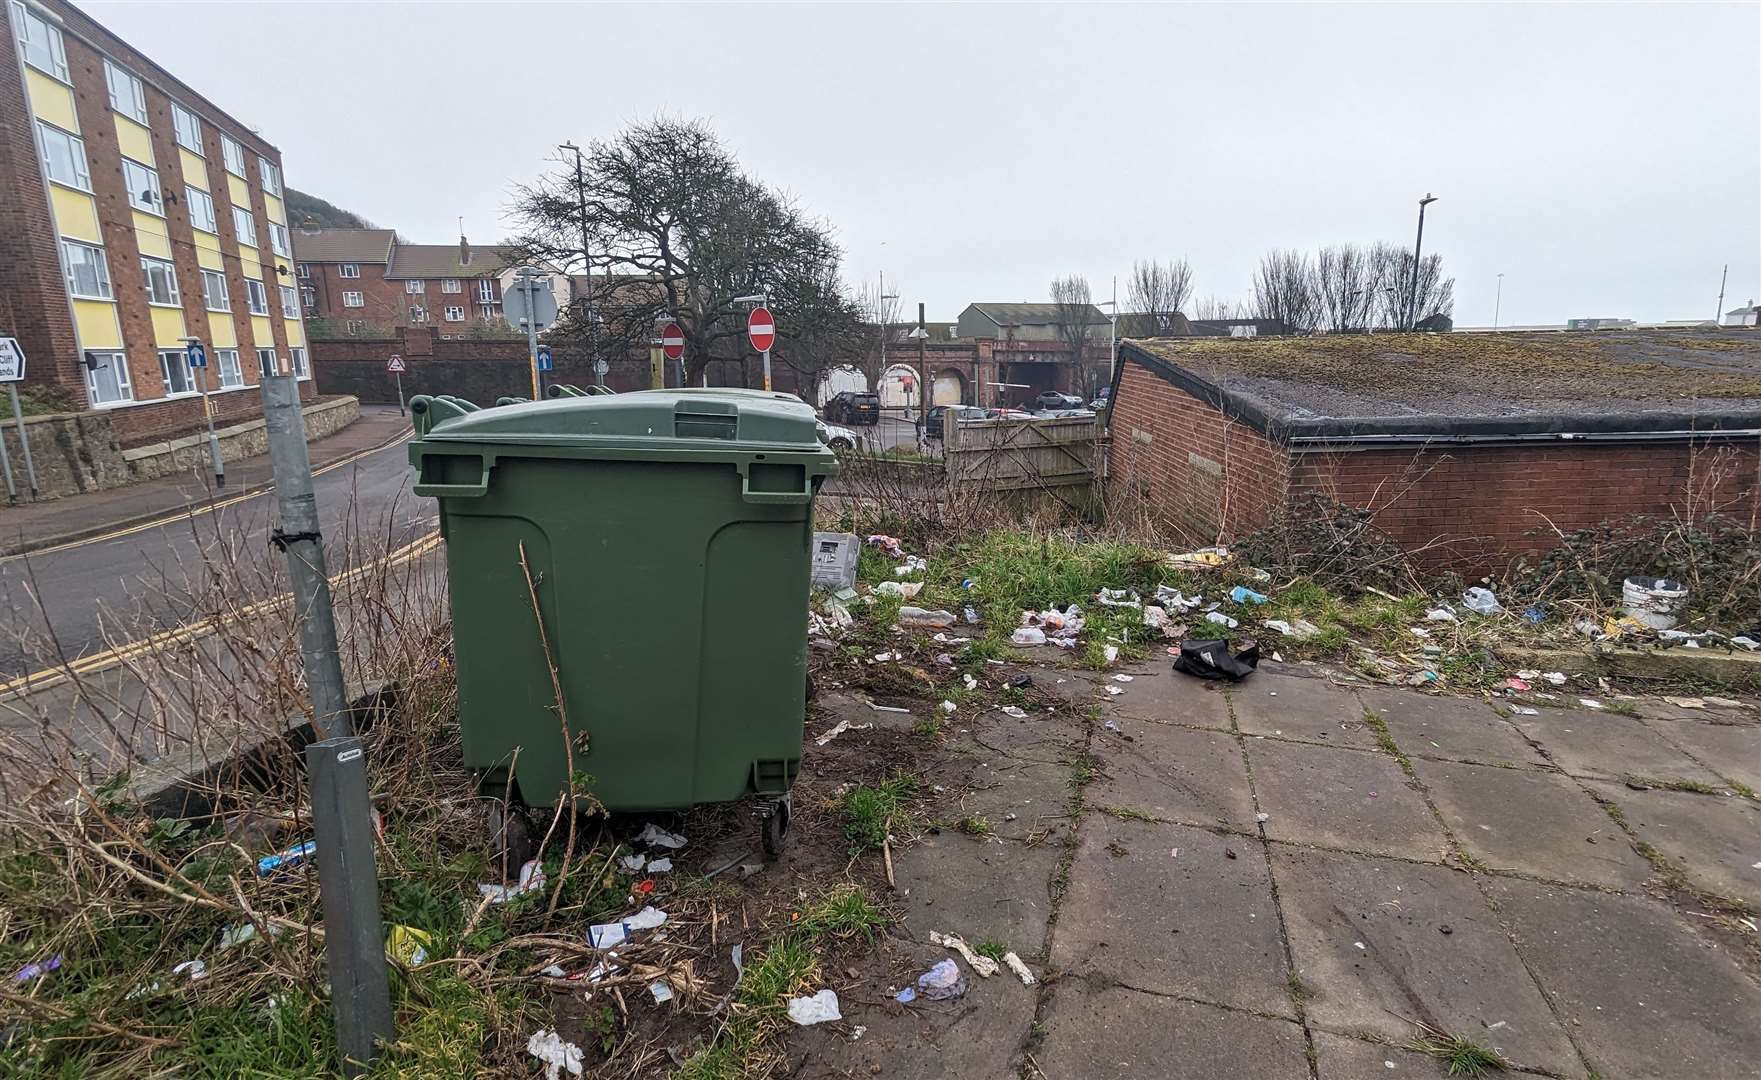 Litter and fly-tipping is a concern for residents